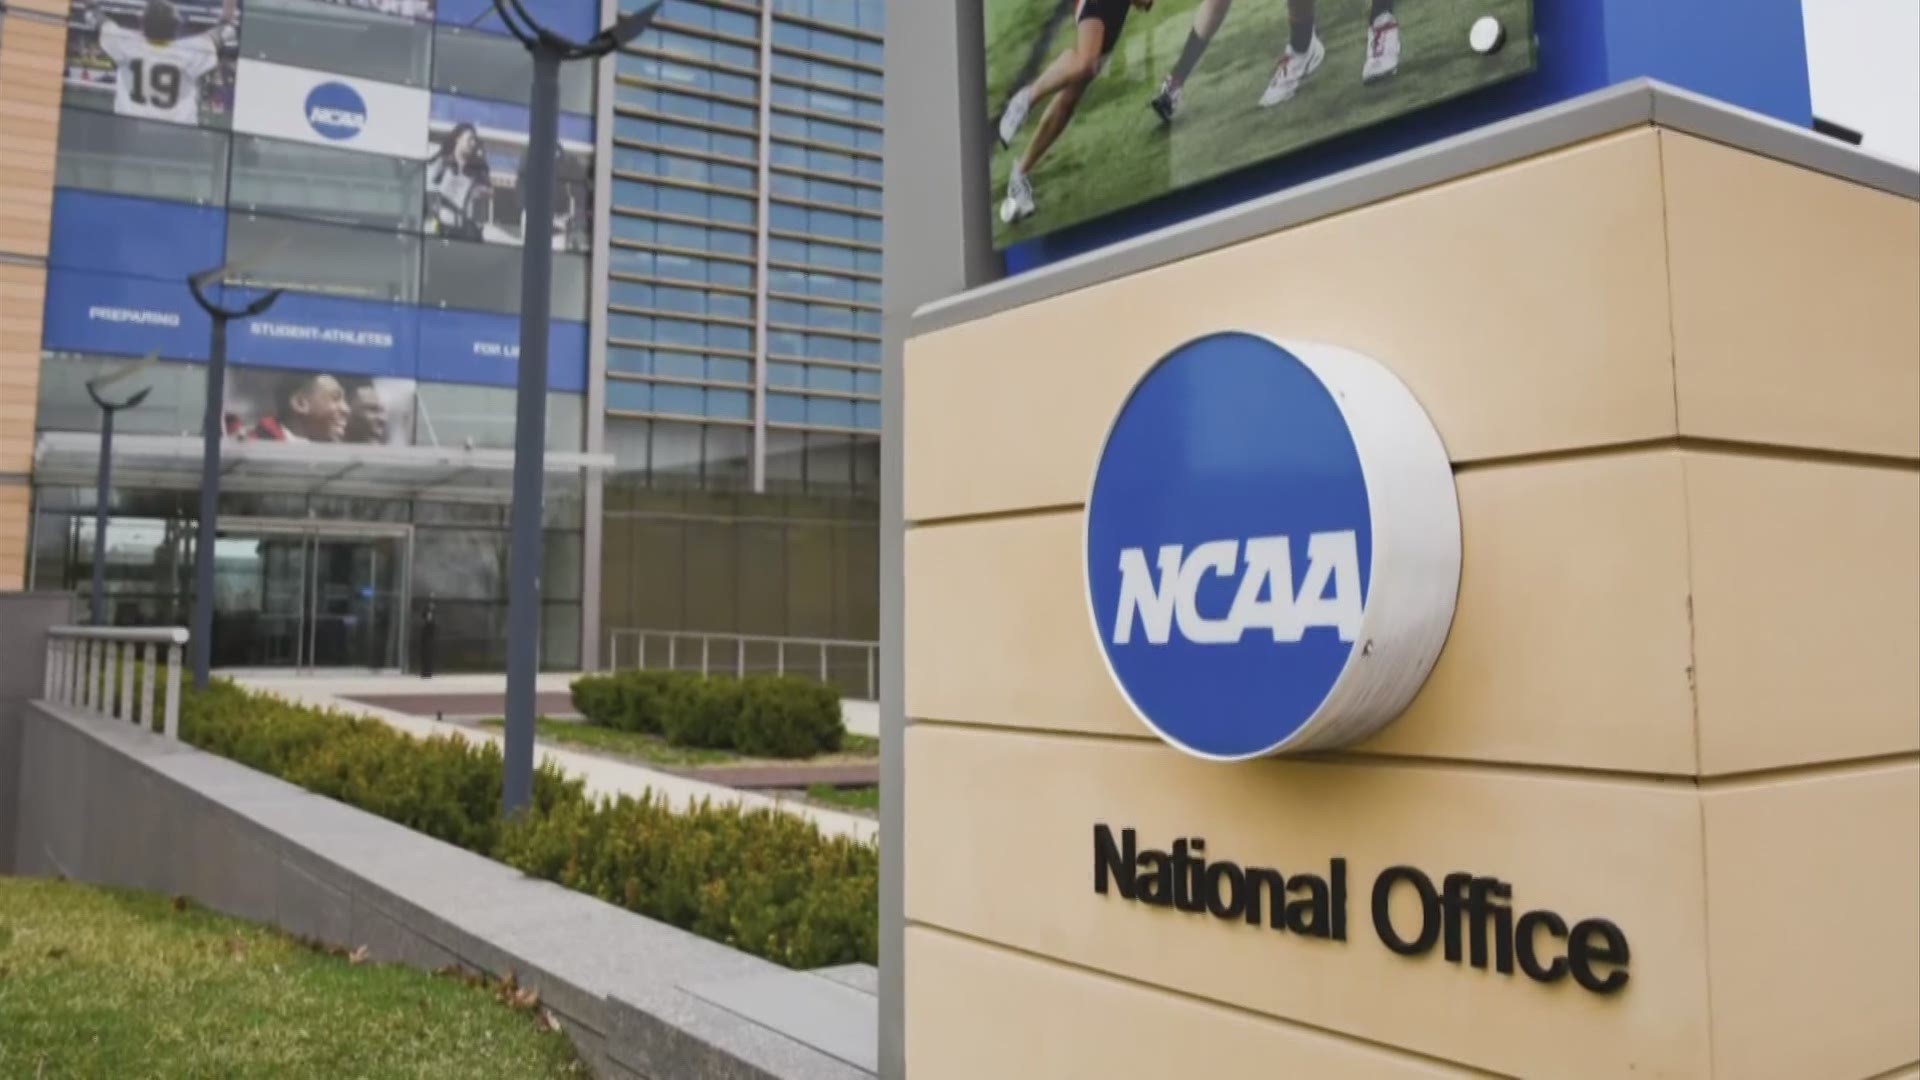 The U.S. Supreme Court ruled the NCAA violated antitrust laws regarding education-related benefits.